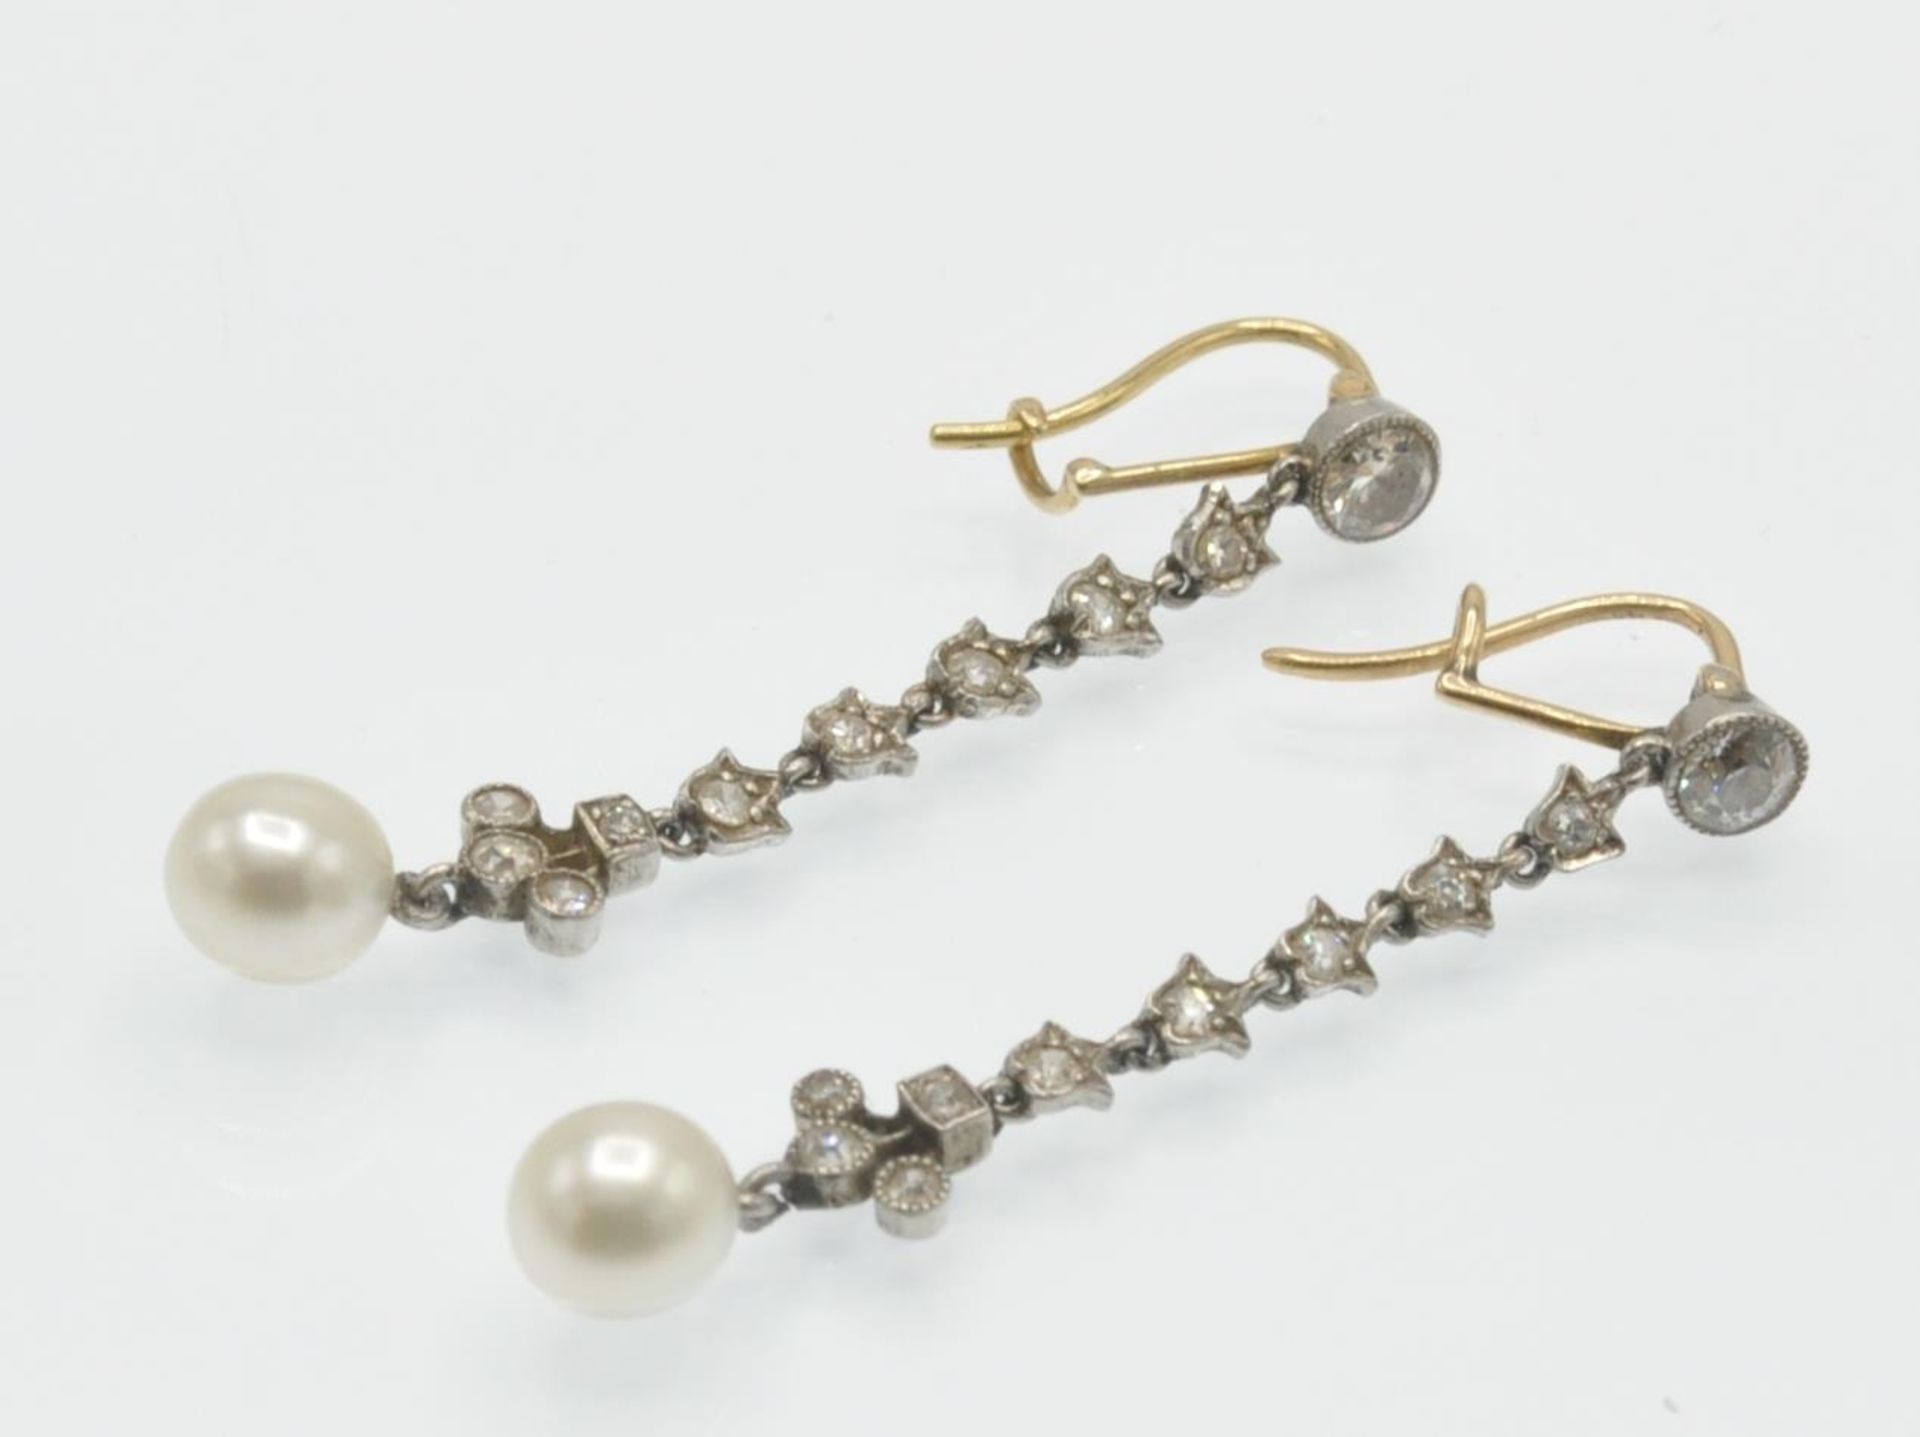 A Pair of Belle Éproque Diamond & Pearl Pendant Earrings - Image 2 of 5